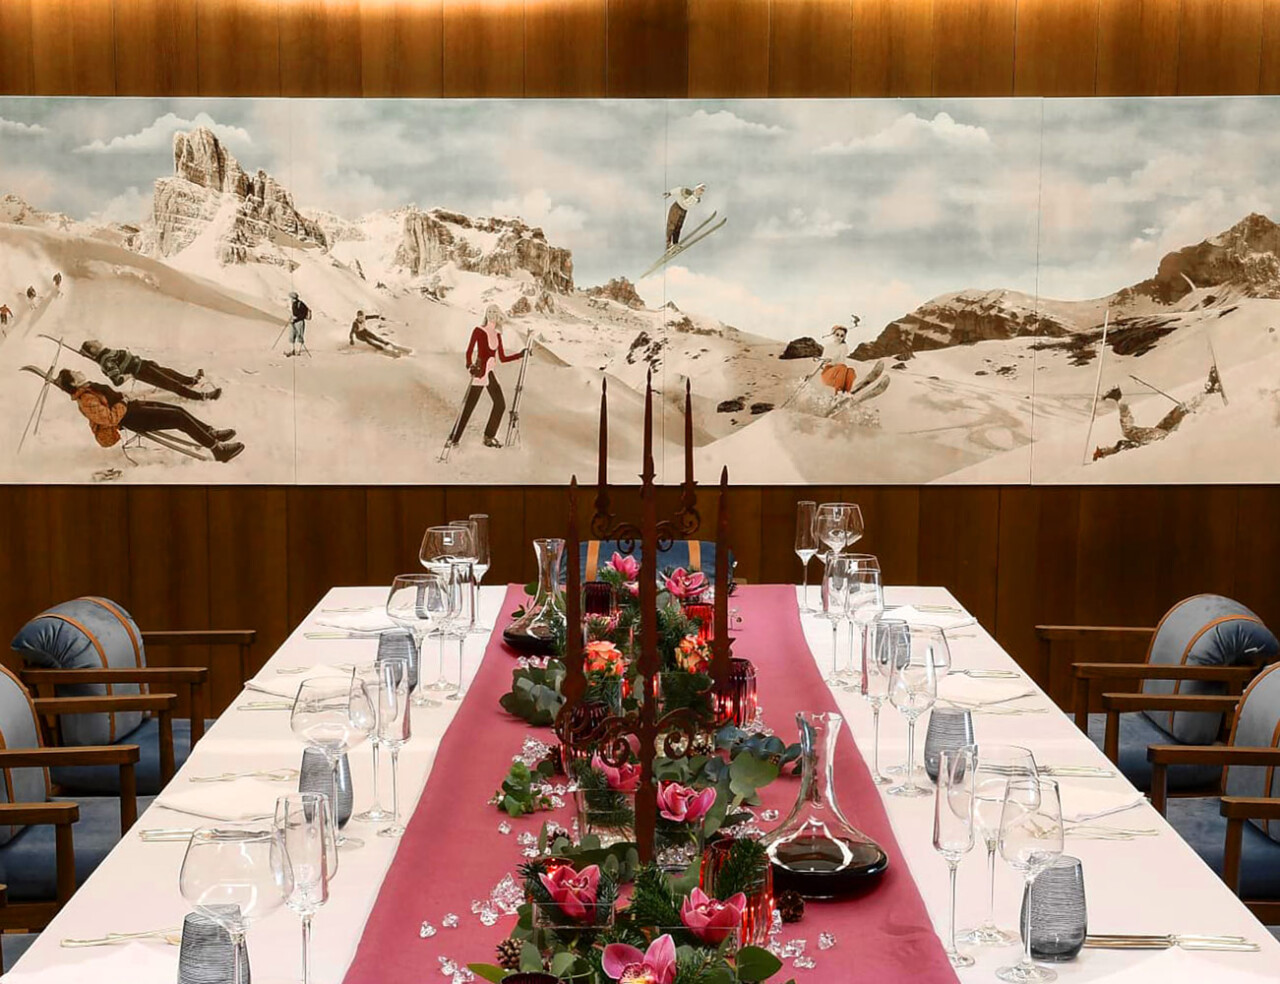 Bespoke skiing scene created by the studio with re-coloured vintage photographs of skiers